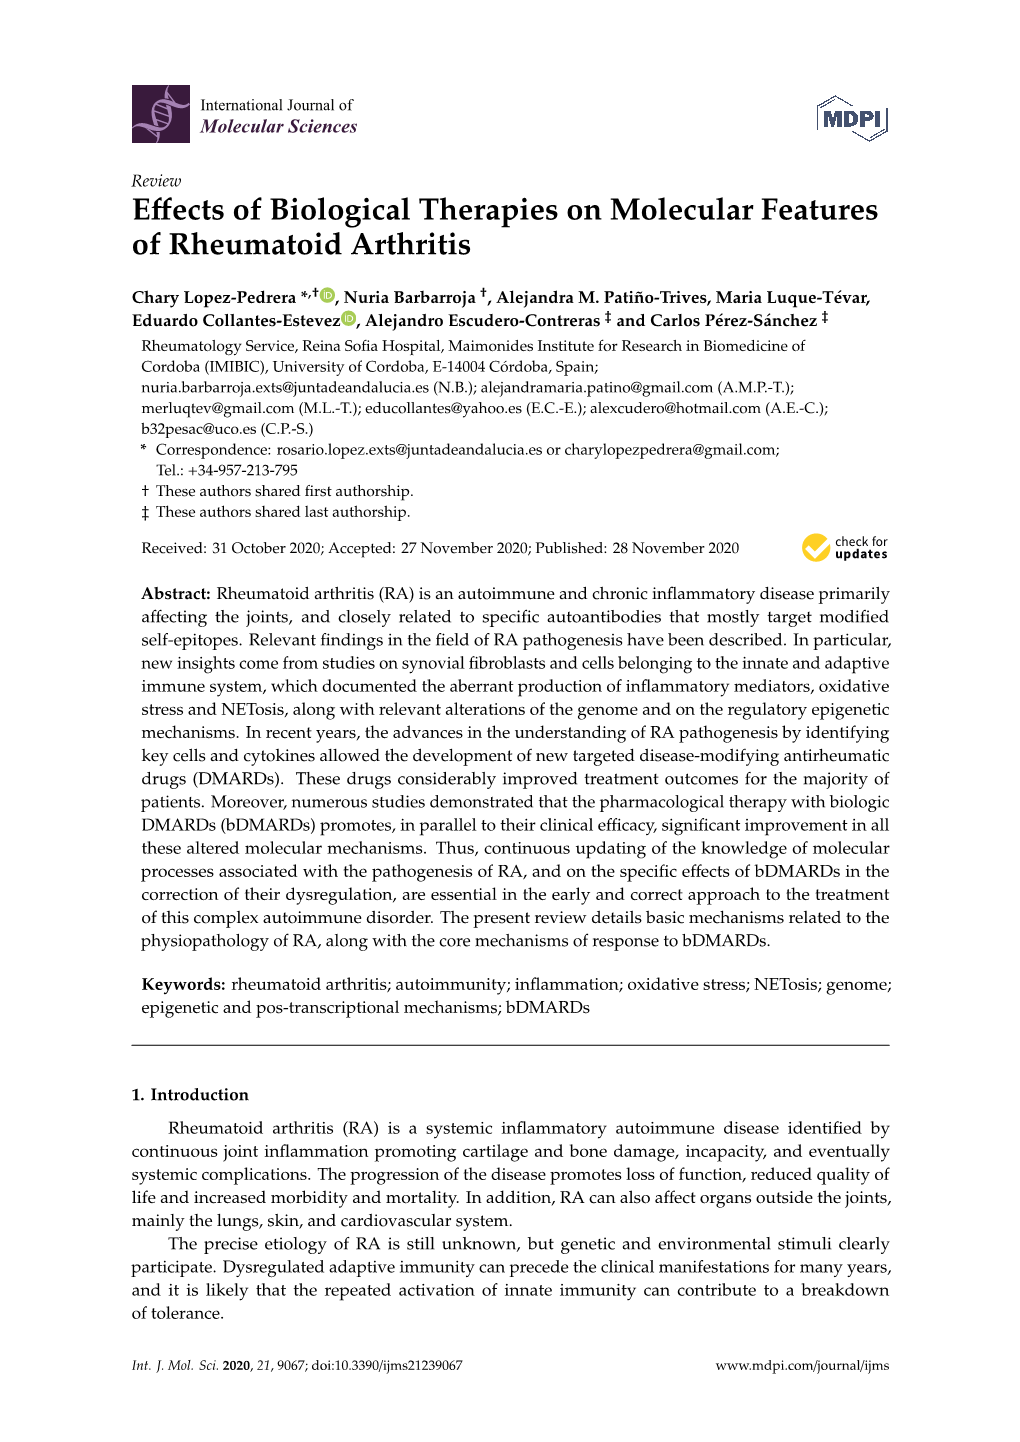 Effects of Biological Therapies on Molecular Features of Rheumatoid